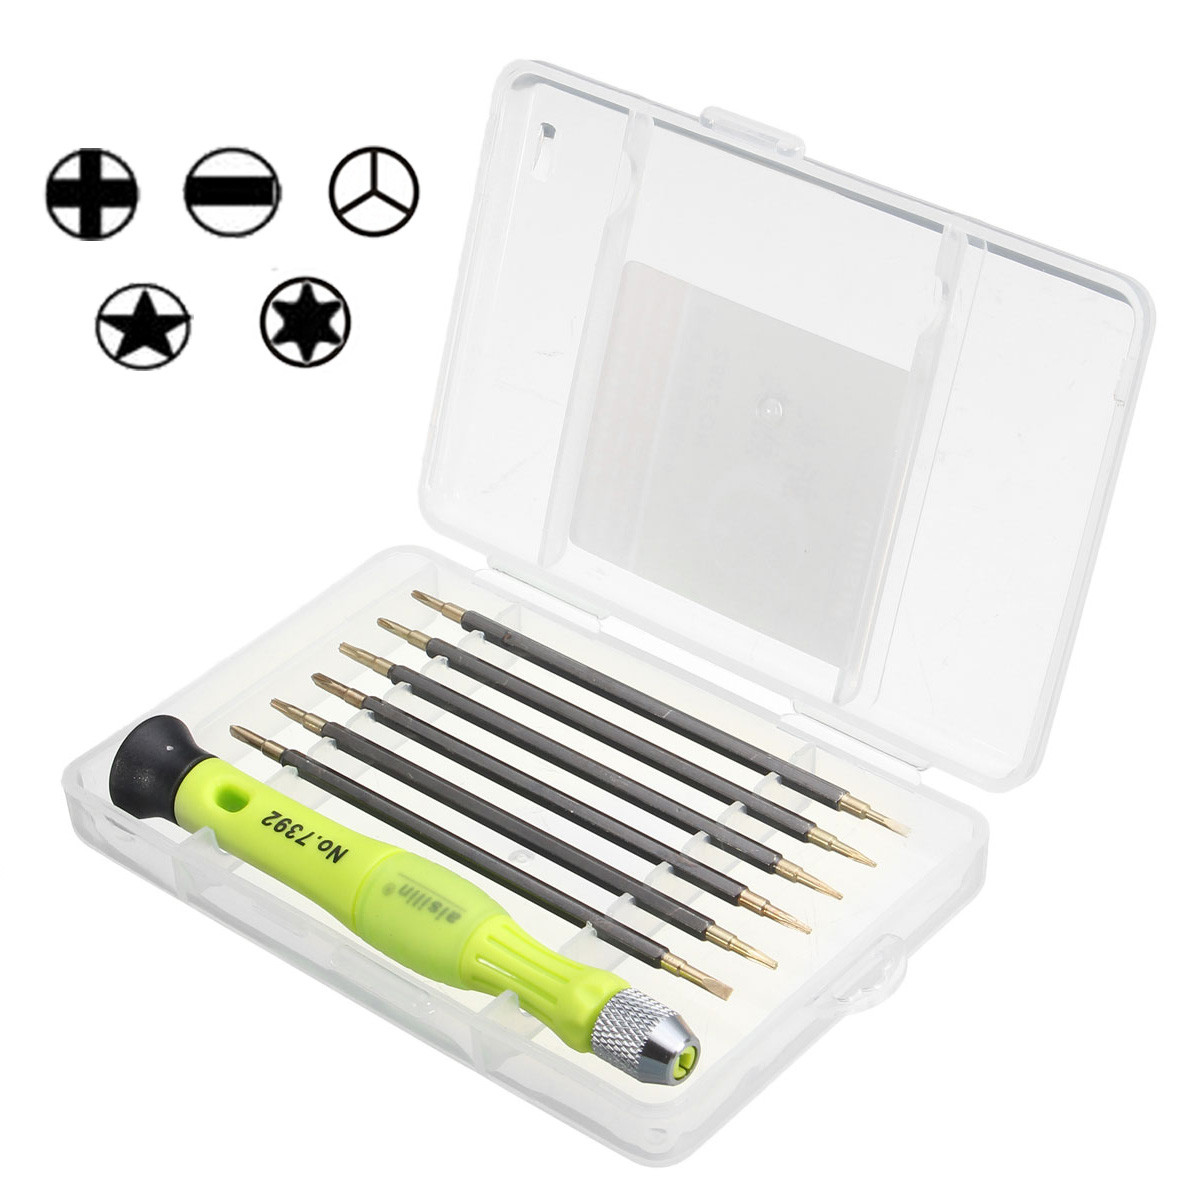 7-in-1-Portable-Screwdriver-Kit-Set-Precision-Professional-Repair-Hand-Tool-with-Box-1020198